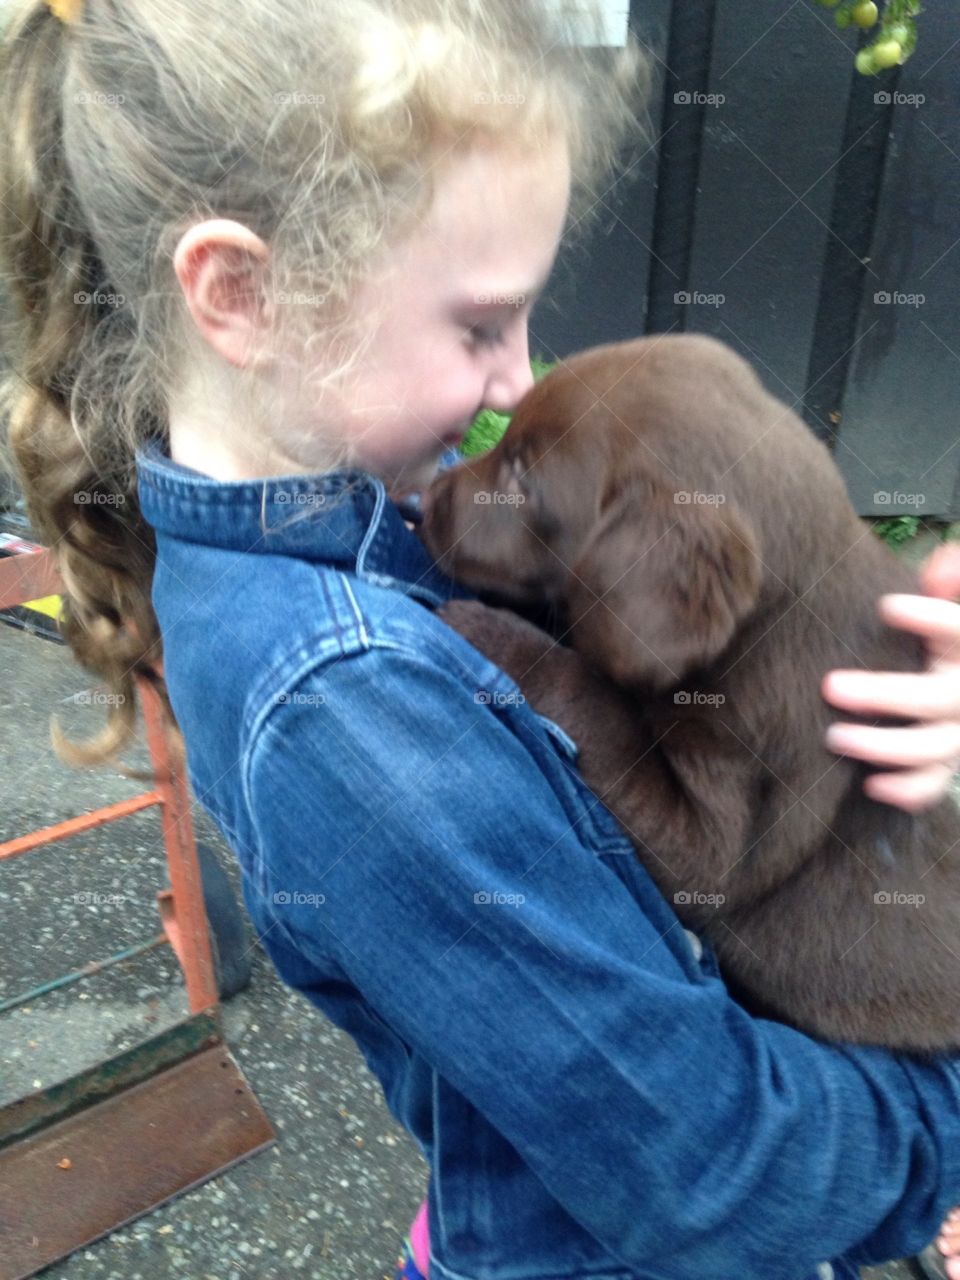 New puppy for nine-year-old girl.